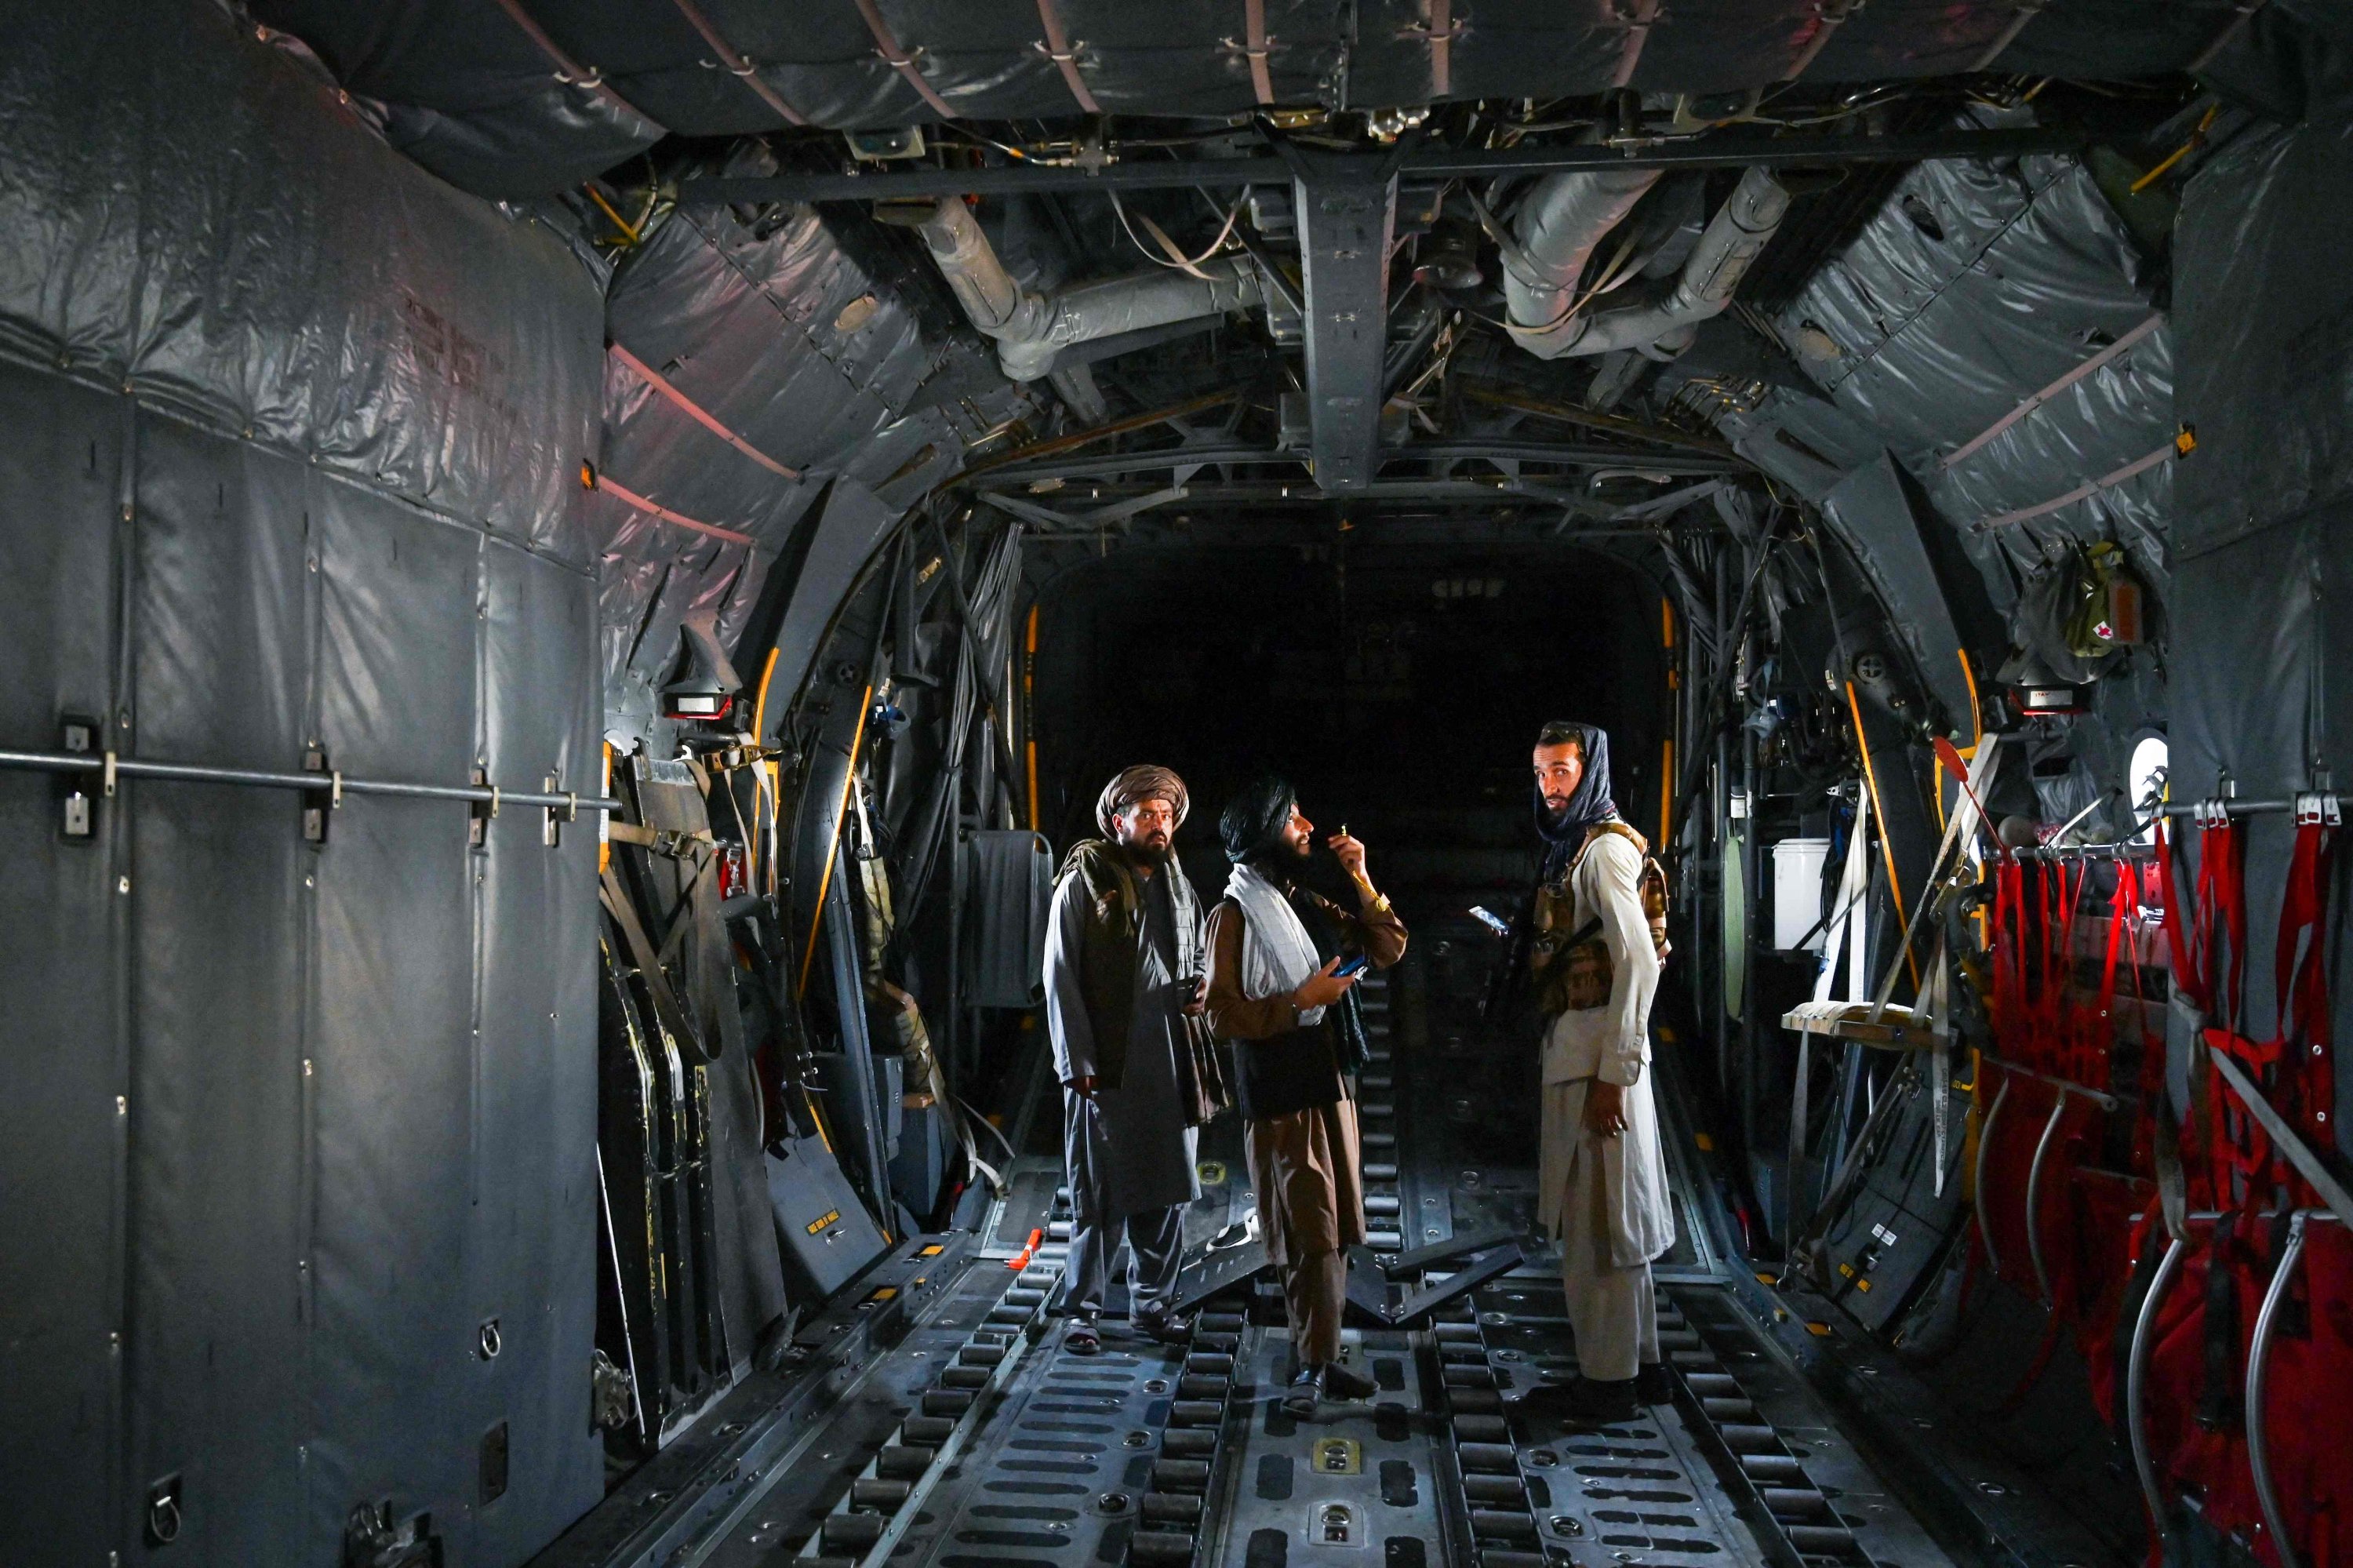 Taliban fighters stand inside an Afghan Air Force aircraft at the airport in Kabul on August 31, 2021, after the U.S. pulled all its troops out of the country to end a brutal 20-year war. (AFP Photo)